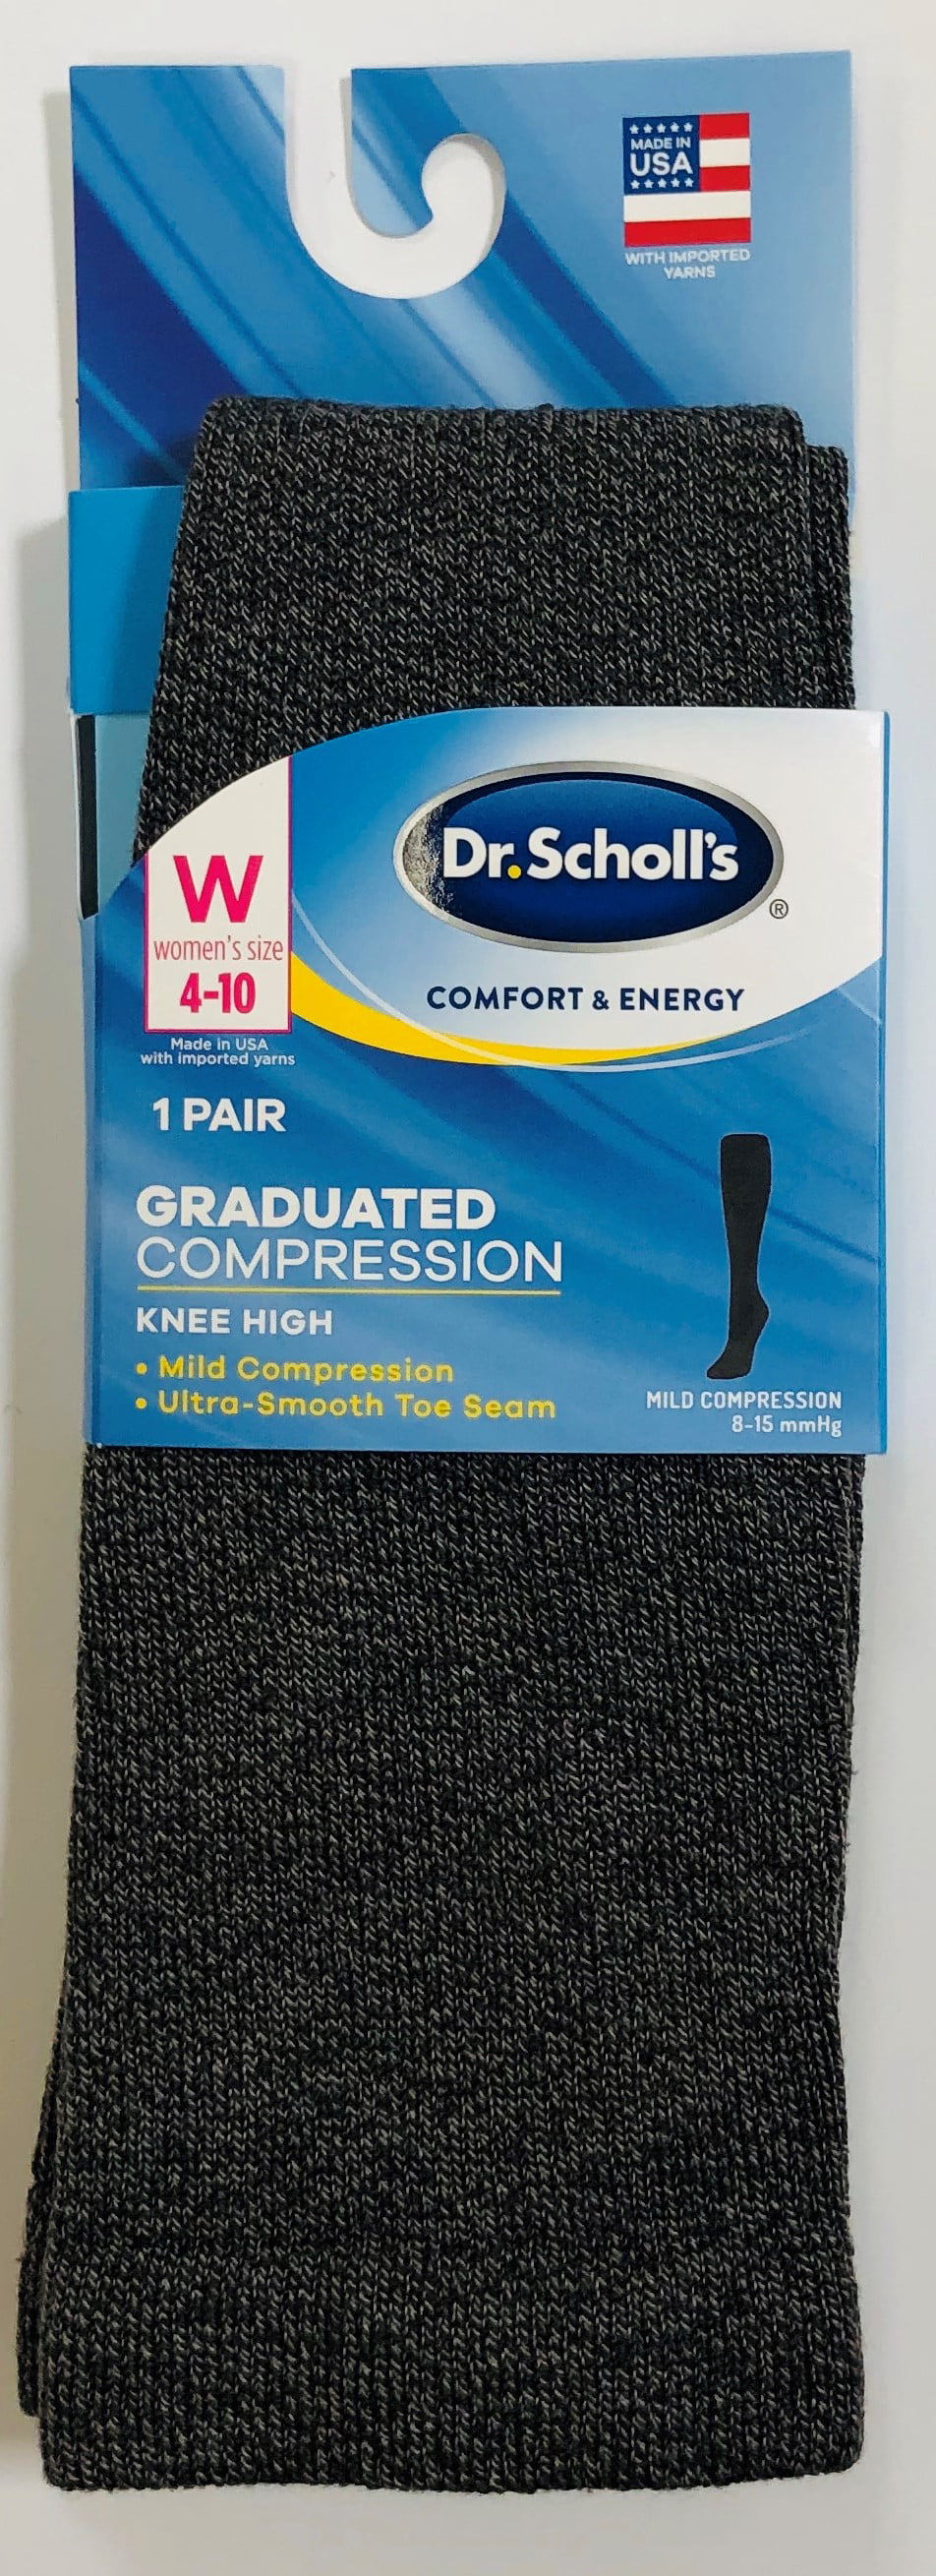 Dr. Scholl's - Dr. Scholl's Women's Marled Compression Knee High Socks ...